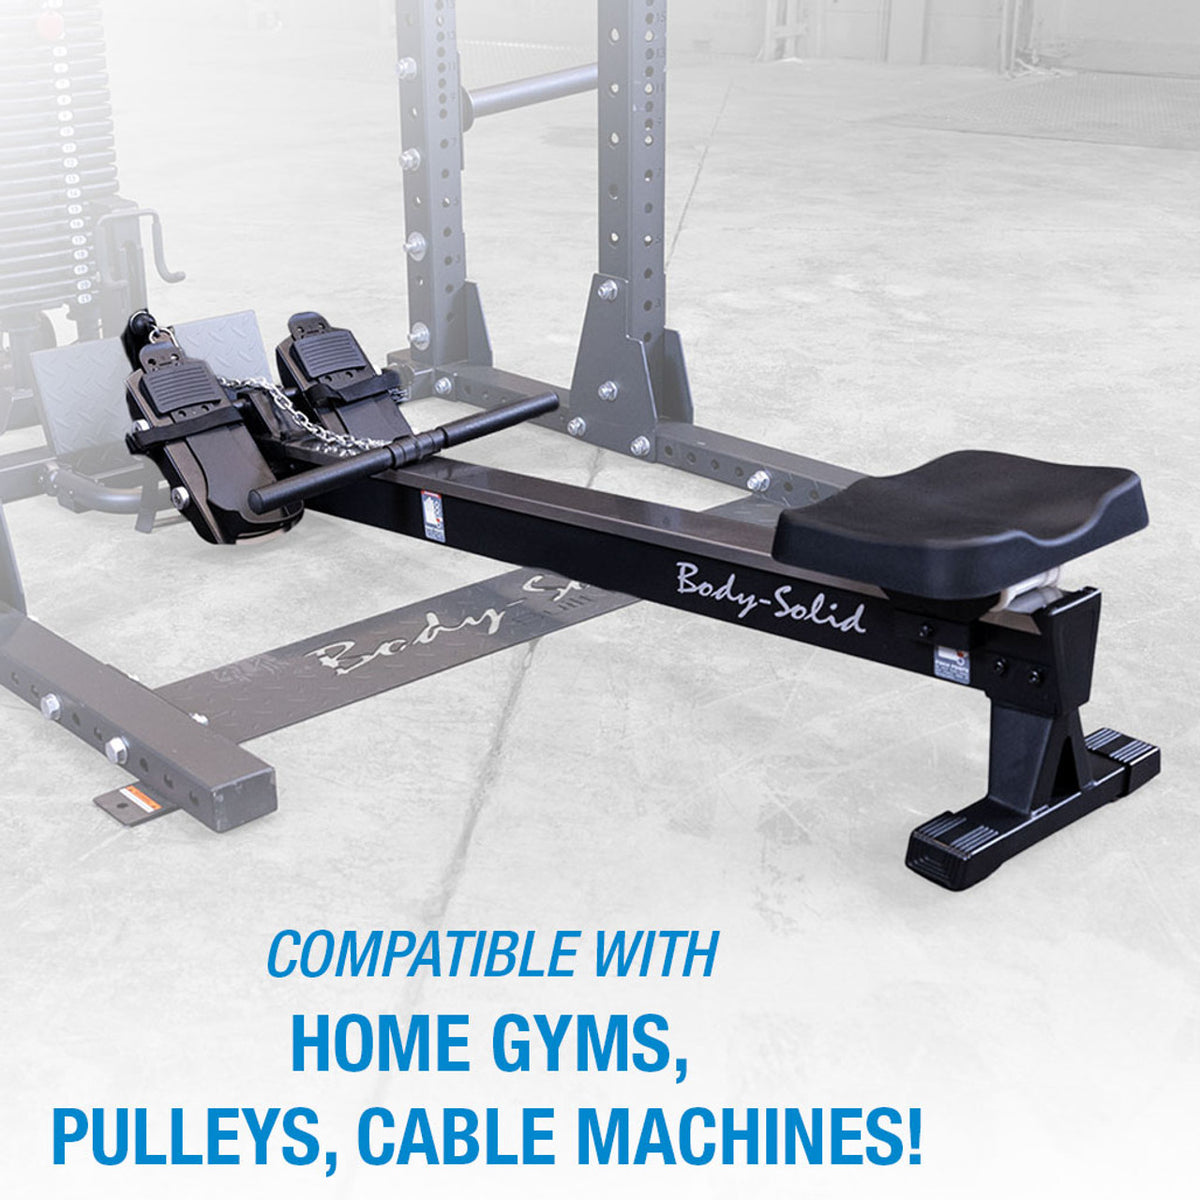 Body-Solid Rower Attachment for Home Gyms, Pulleys, Cable Machines